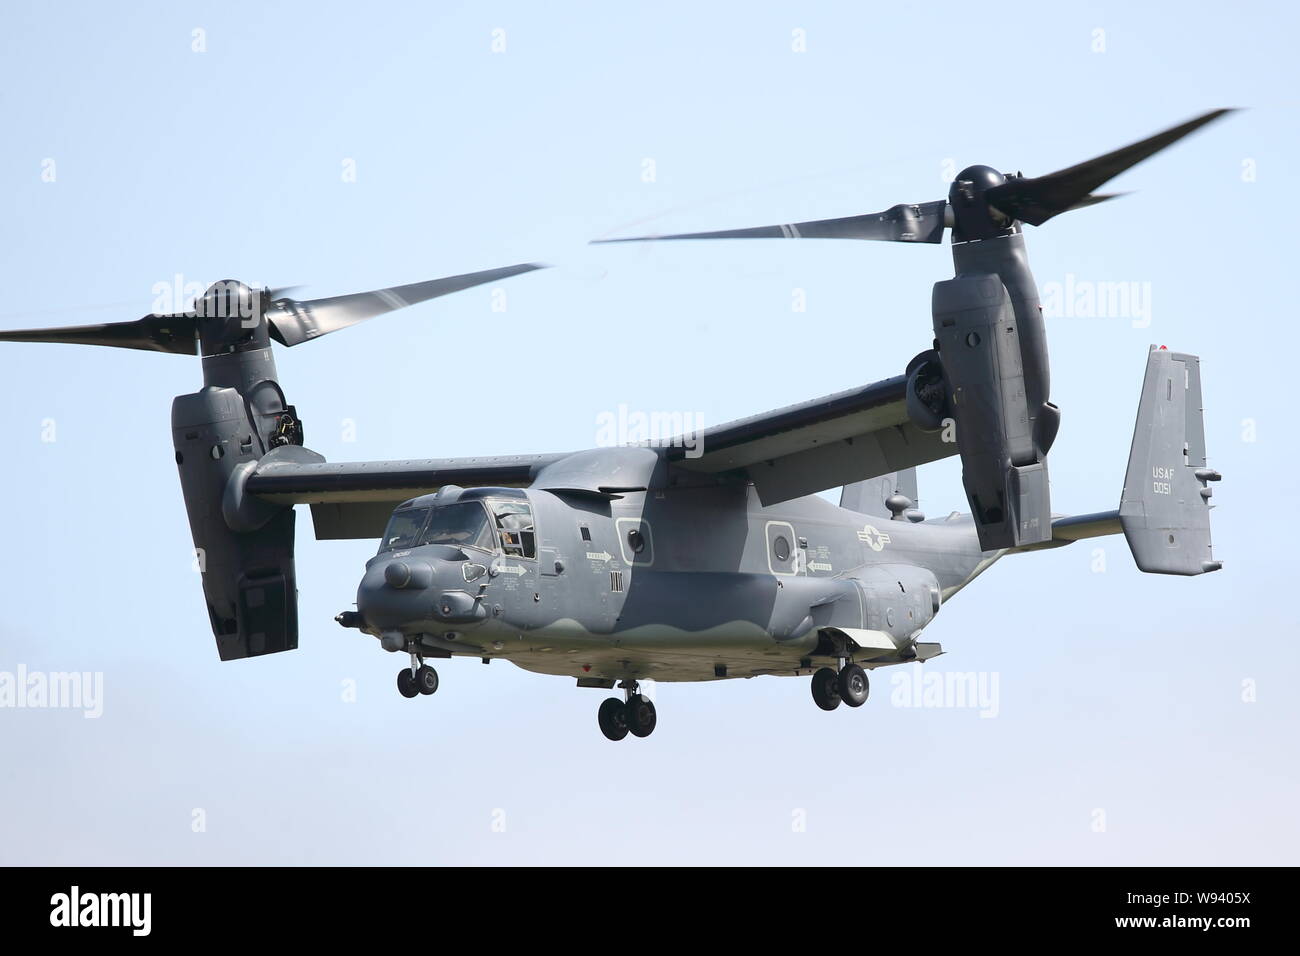 Bell Boeing V-22 Osprey tilt rotor aircraft at the Royal International Air Tattoo RIAT 2019 at RAF Fairford, Gloucestershire, UK Stock Photo